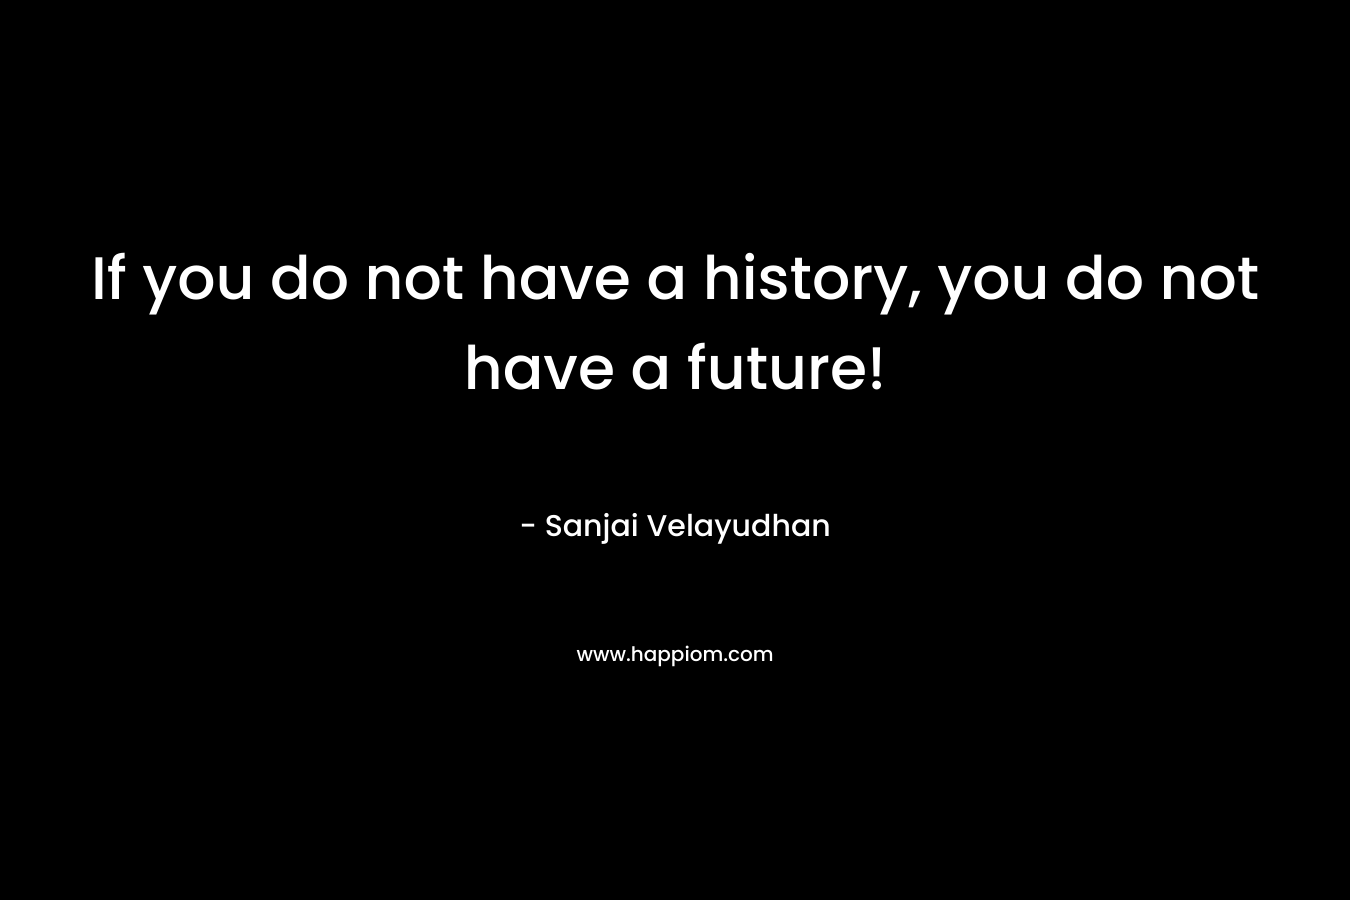 If you do not have a history, you do not have a future!